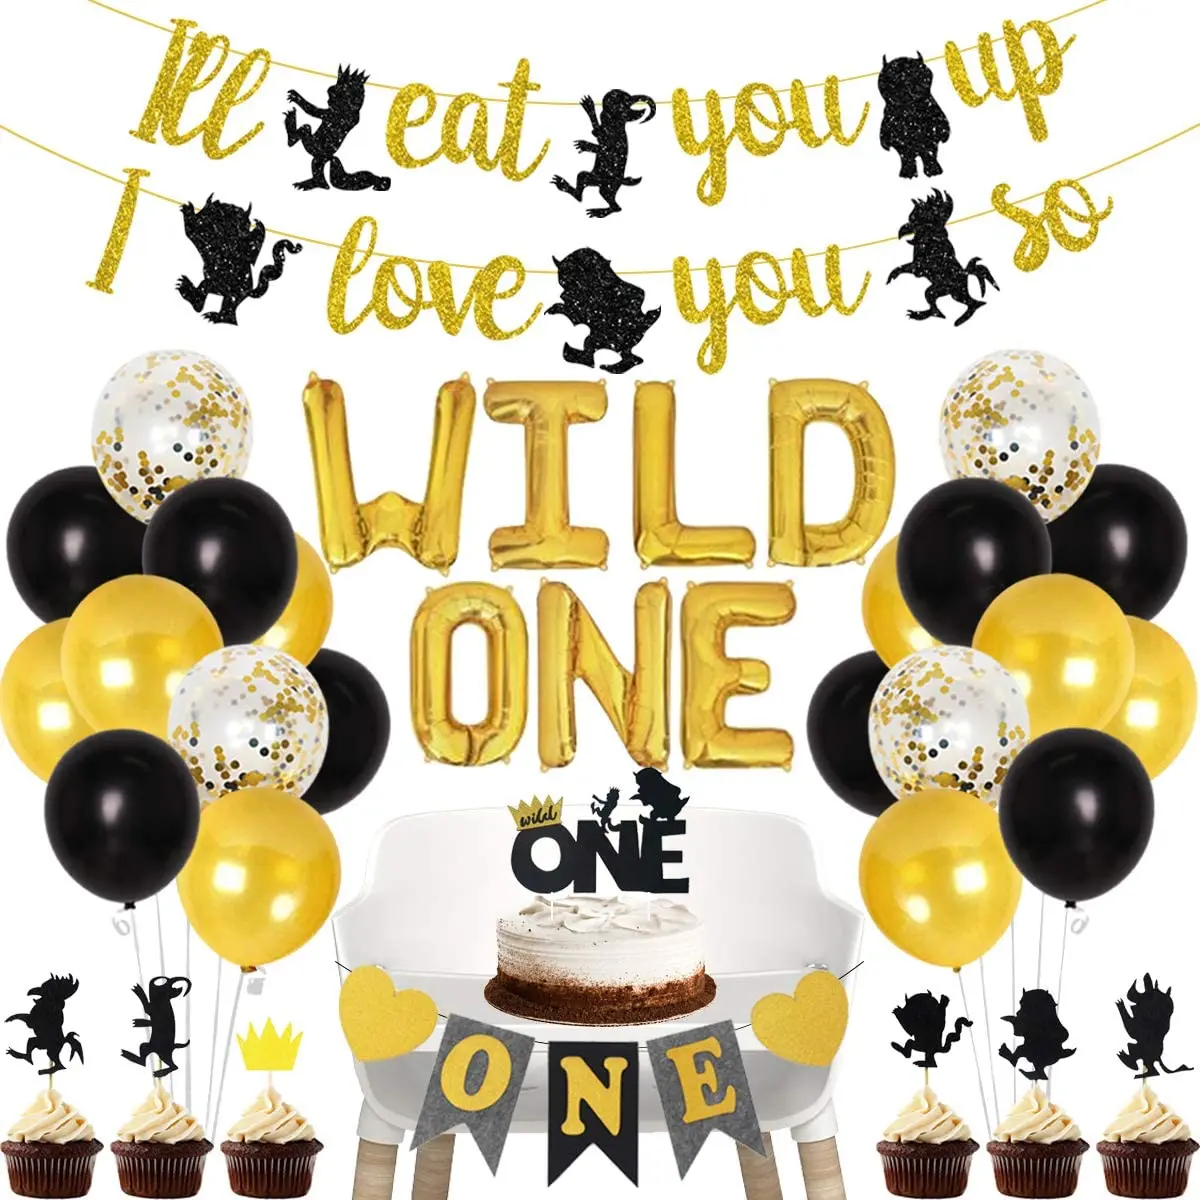 

Wild One Birthday Supplies Black Gold I'll Eat You Up I Love You So Banner Cake Topper for Boys 1st Birthday Party Decorations